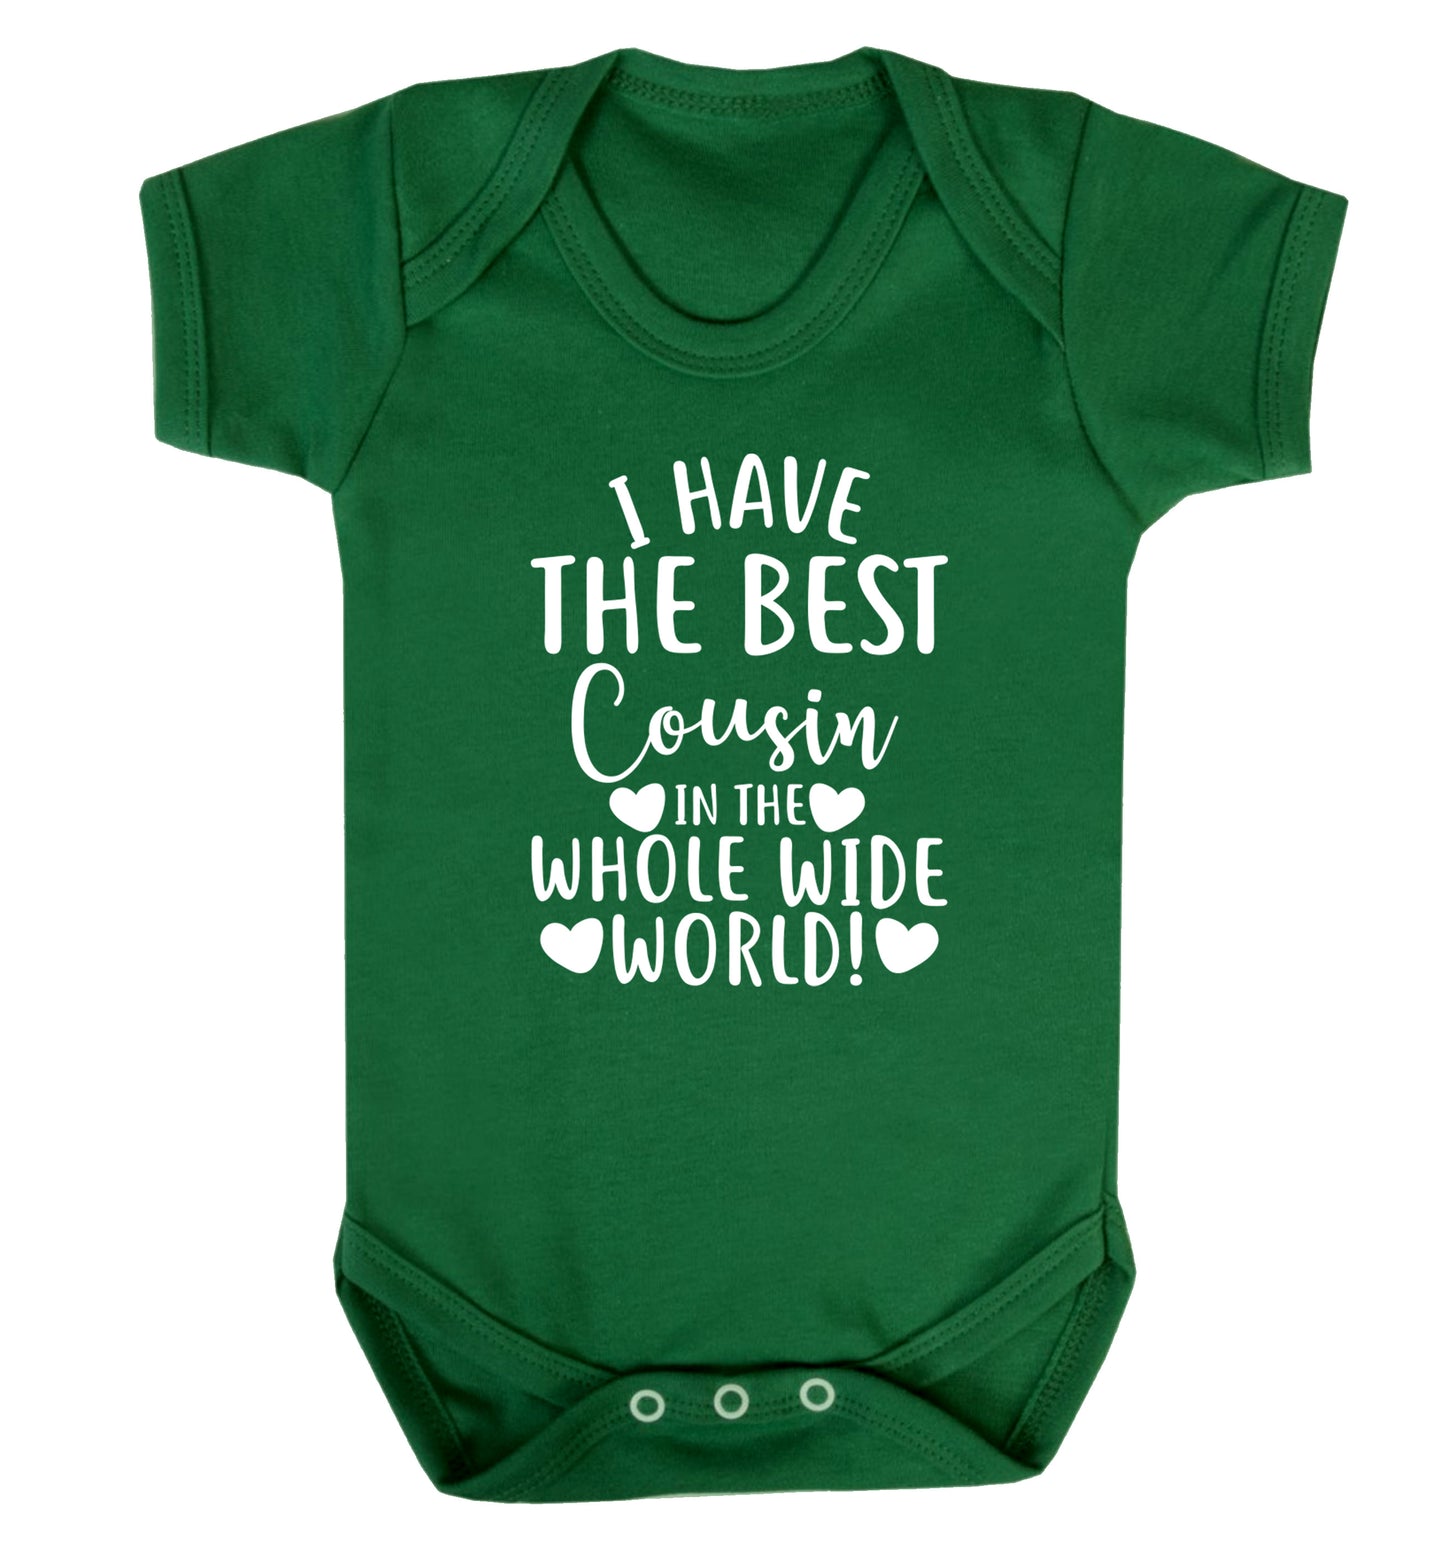 I have the best cousin in the whole wide world! Baby Vest green 18-24 months